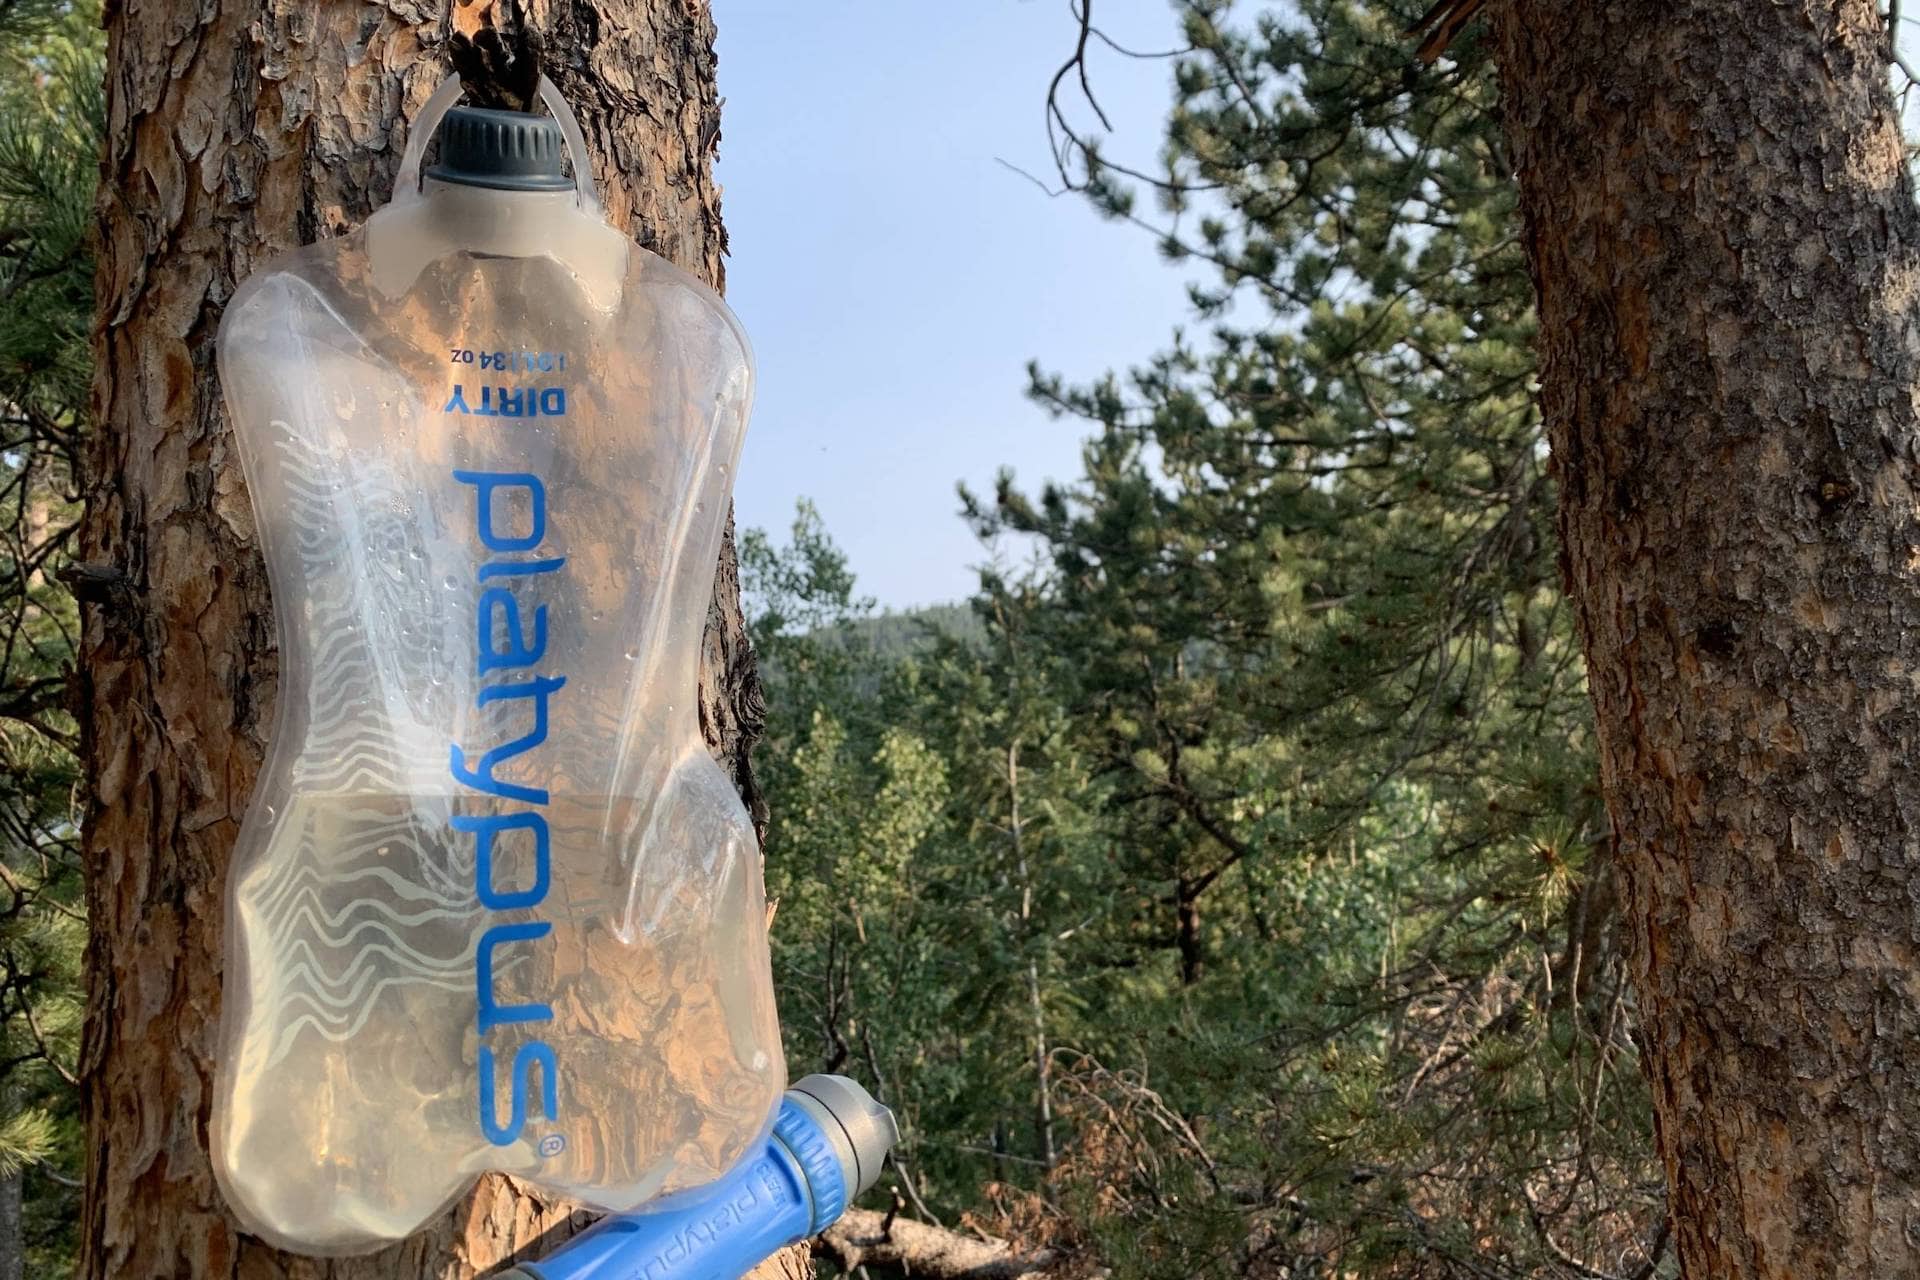 REI Backpacking Checklist - Water Hydration